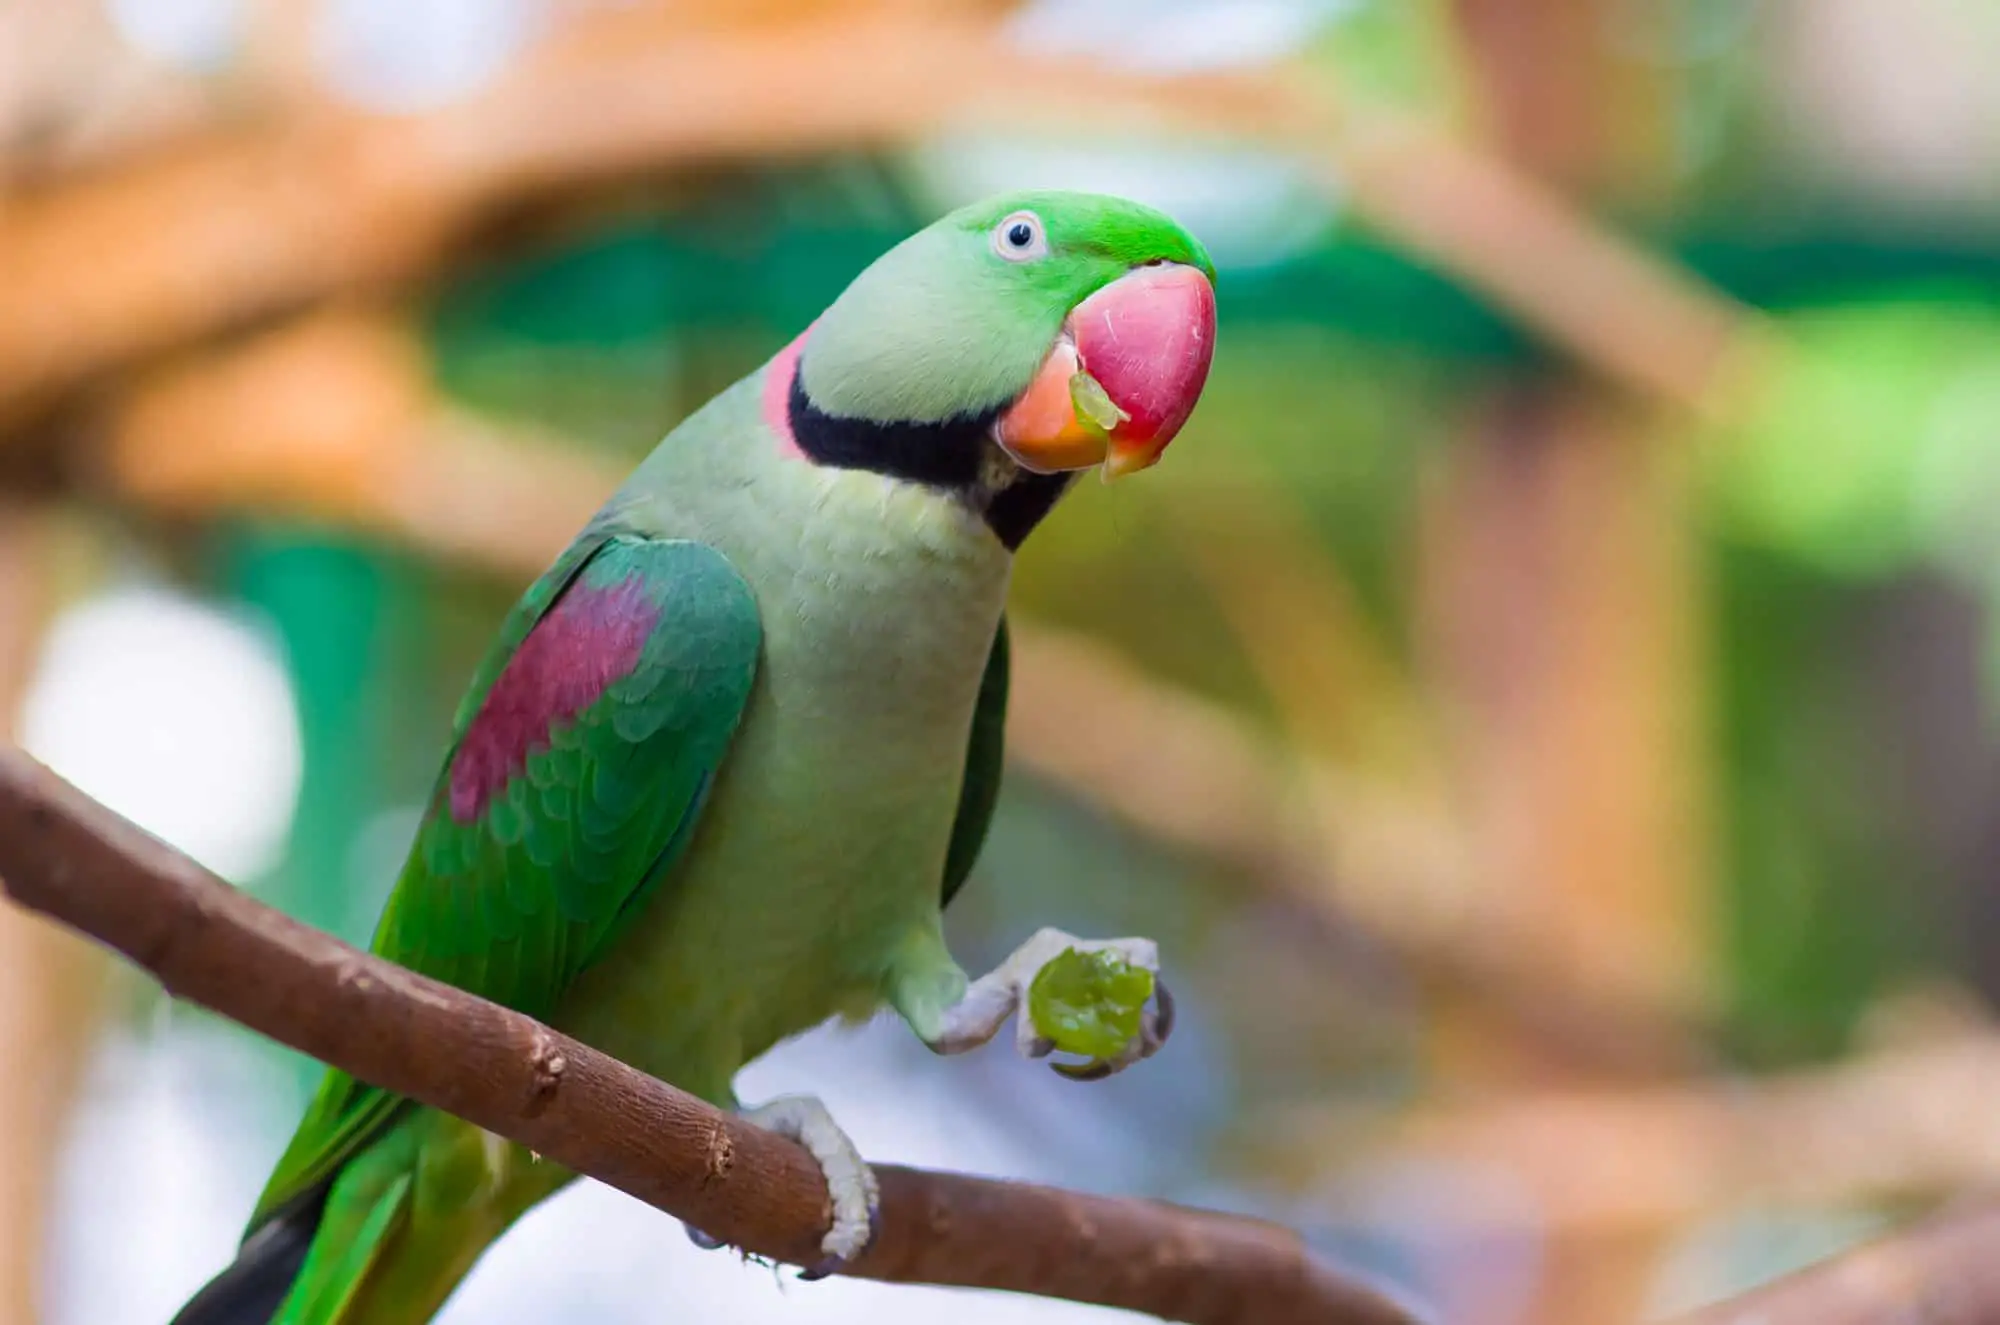 are grapes harmful for parrots